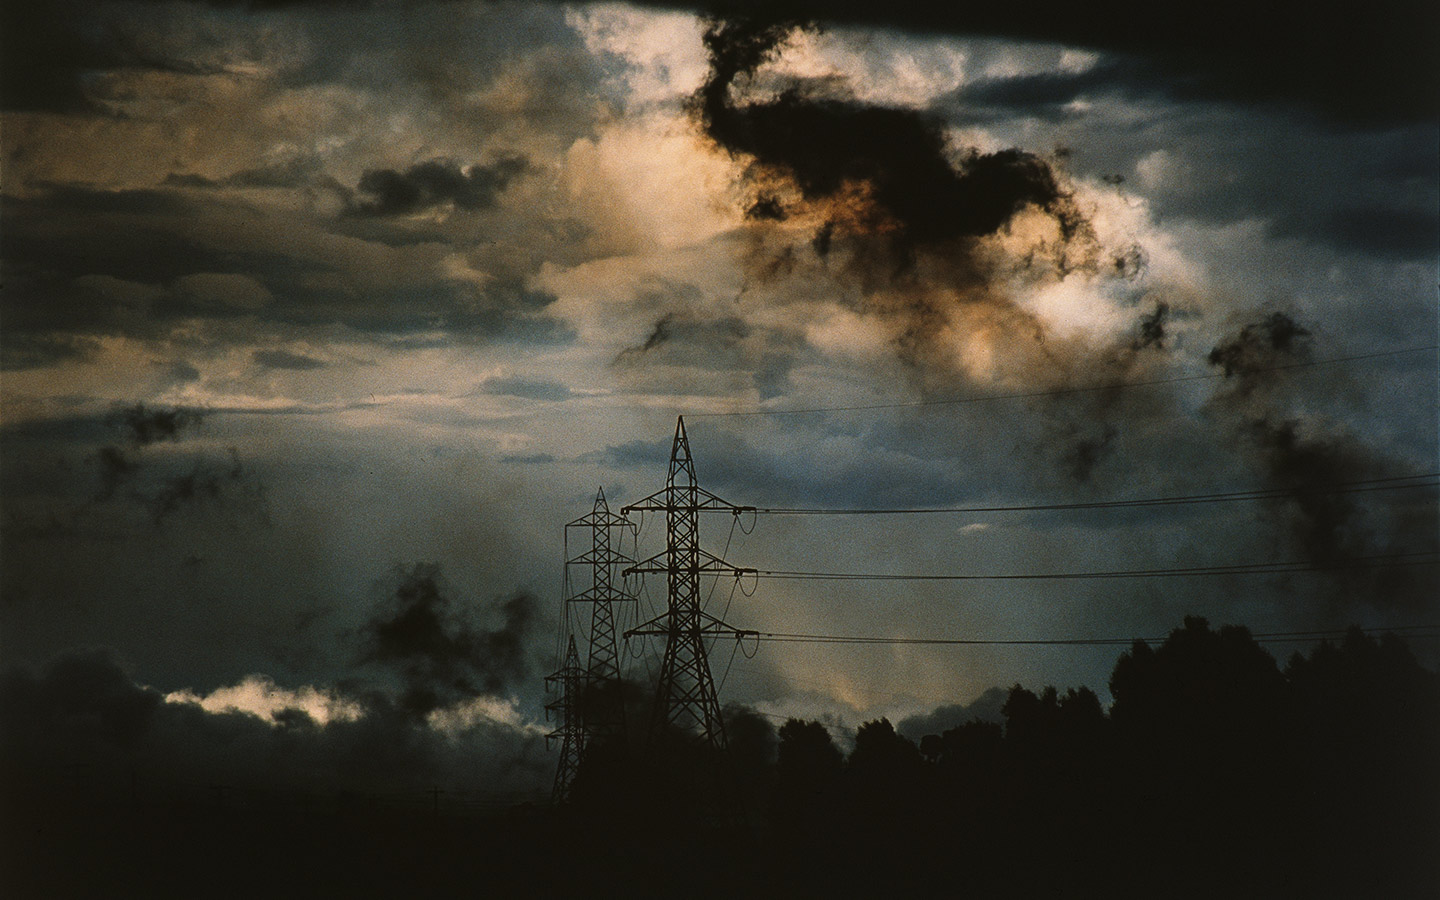 Bill Henson, ‘Untitled’, 2000-03, 069. Courtesy of the artist, Tolarno Galleries and Roslyn Oxley9 Gallery.